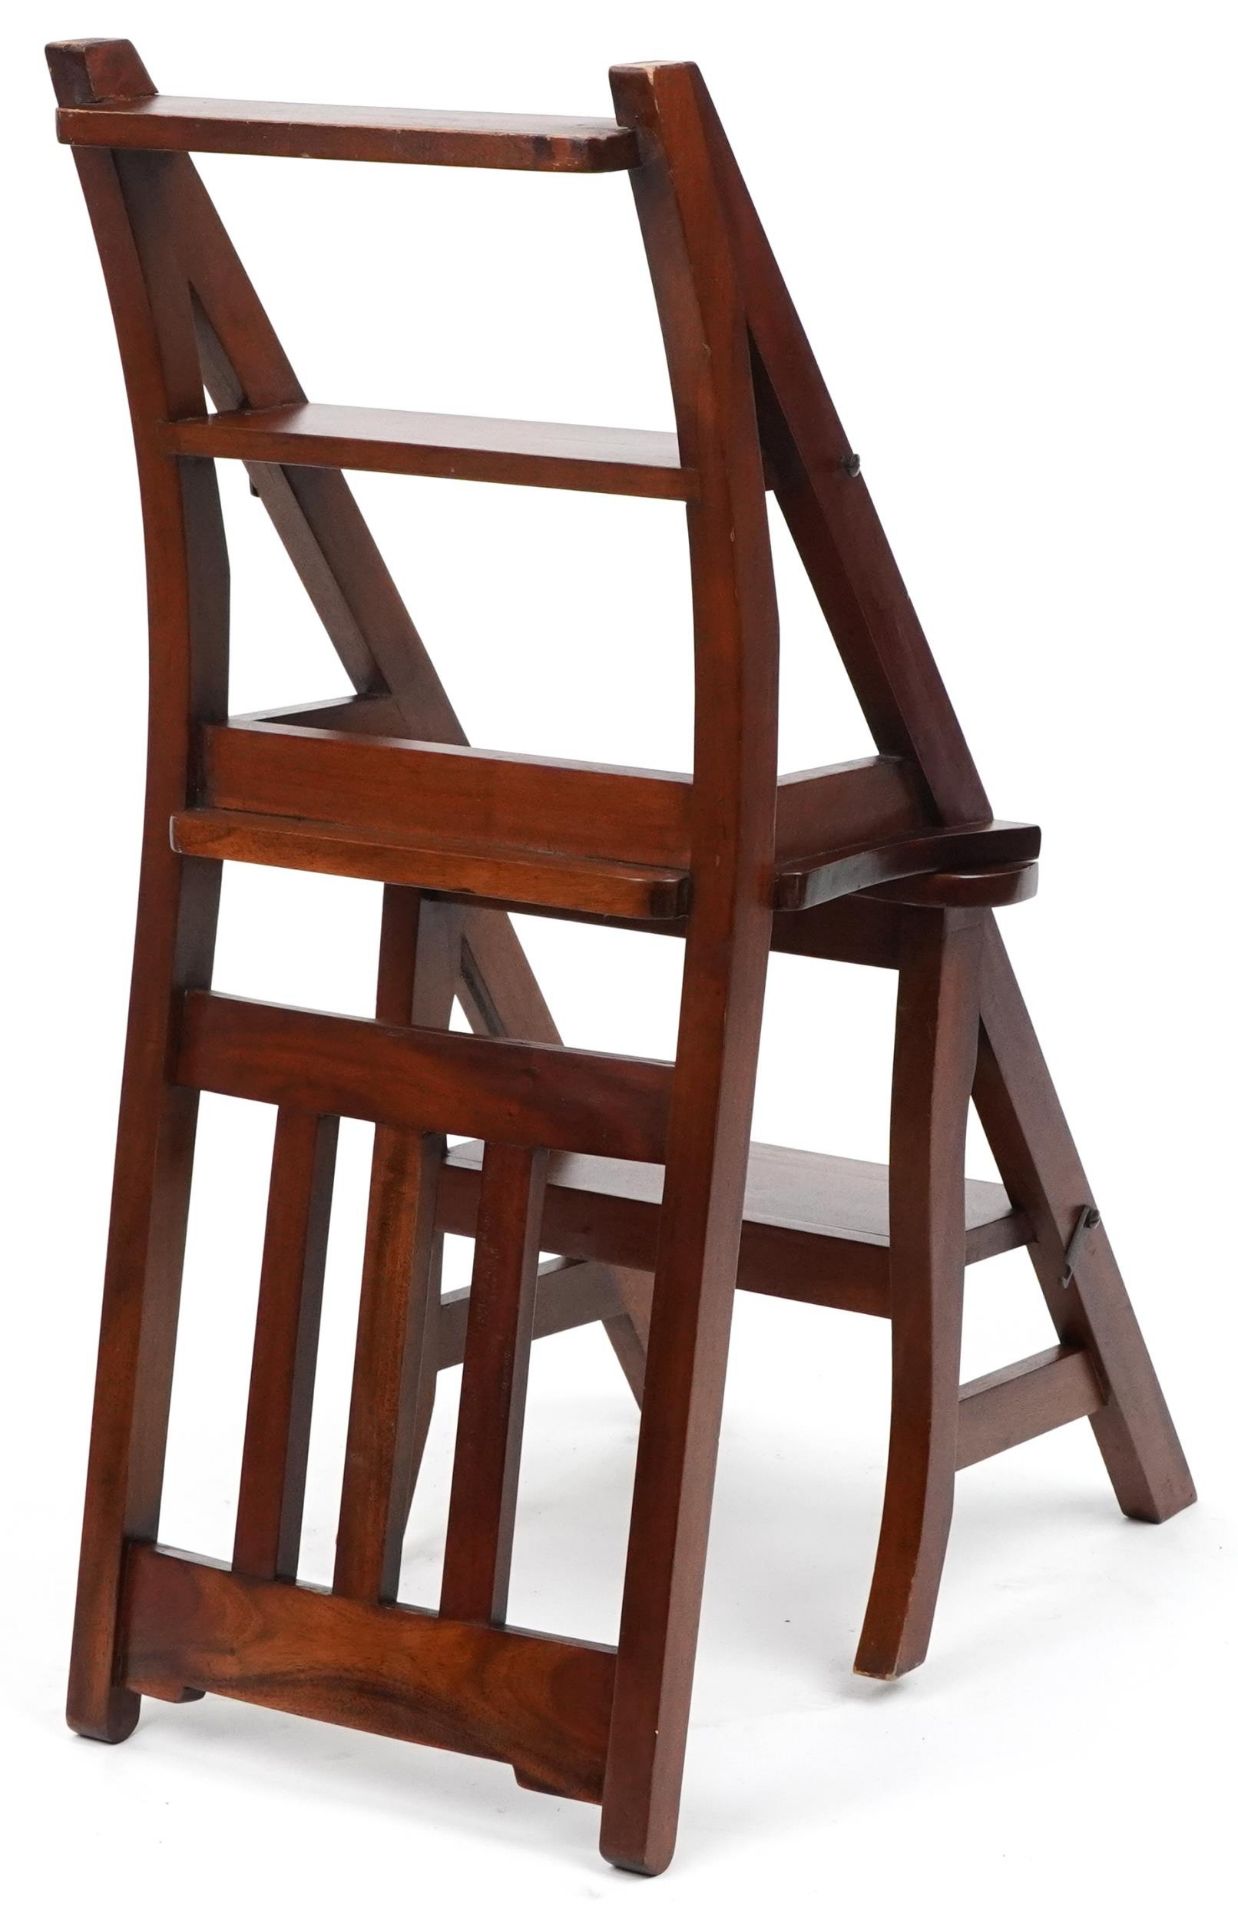 Set of metamorphic hardwood library steps/chair, 91.5cm high when as chair - Image 3 of 7